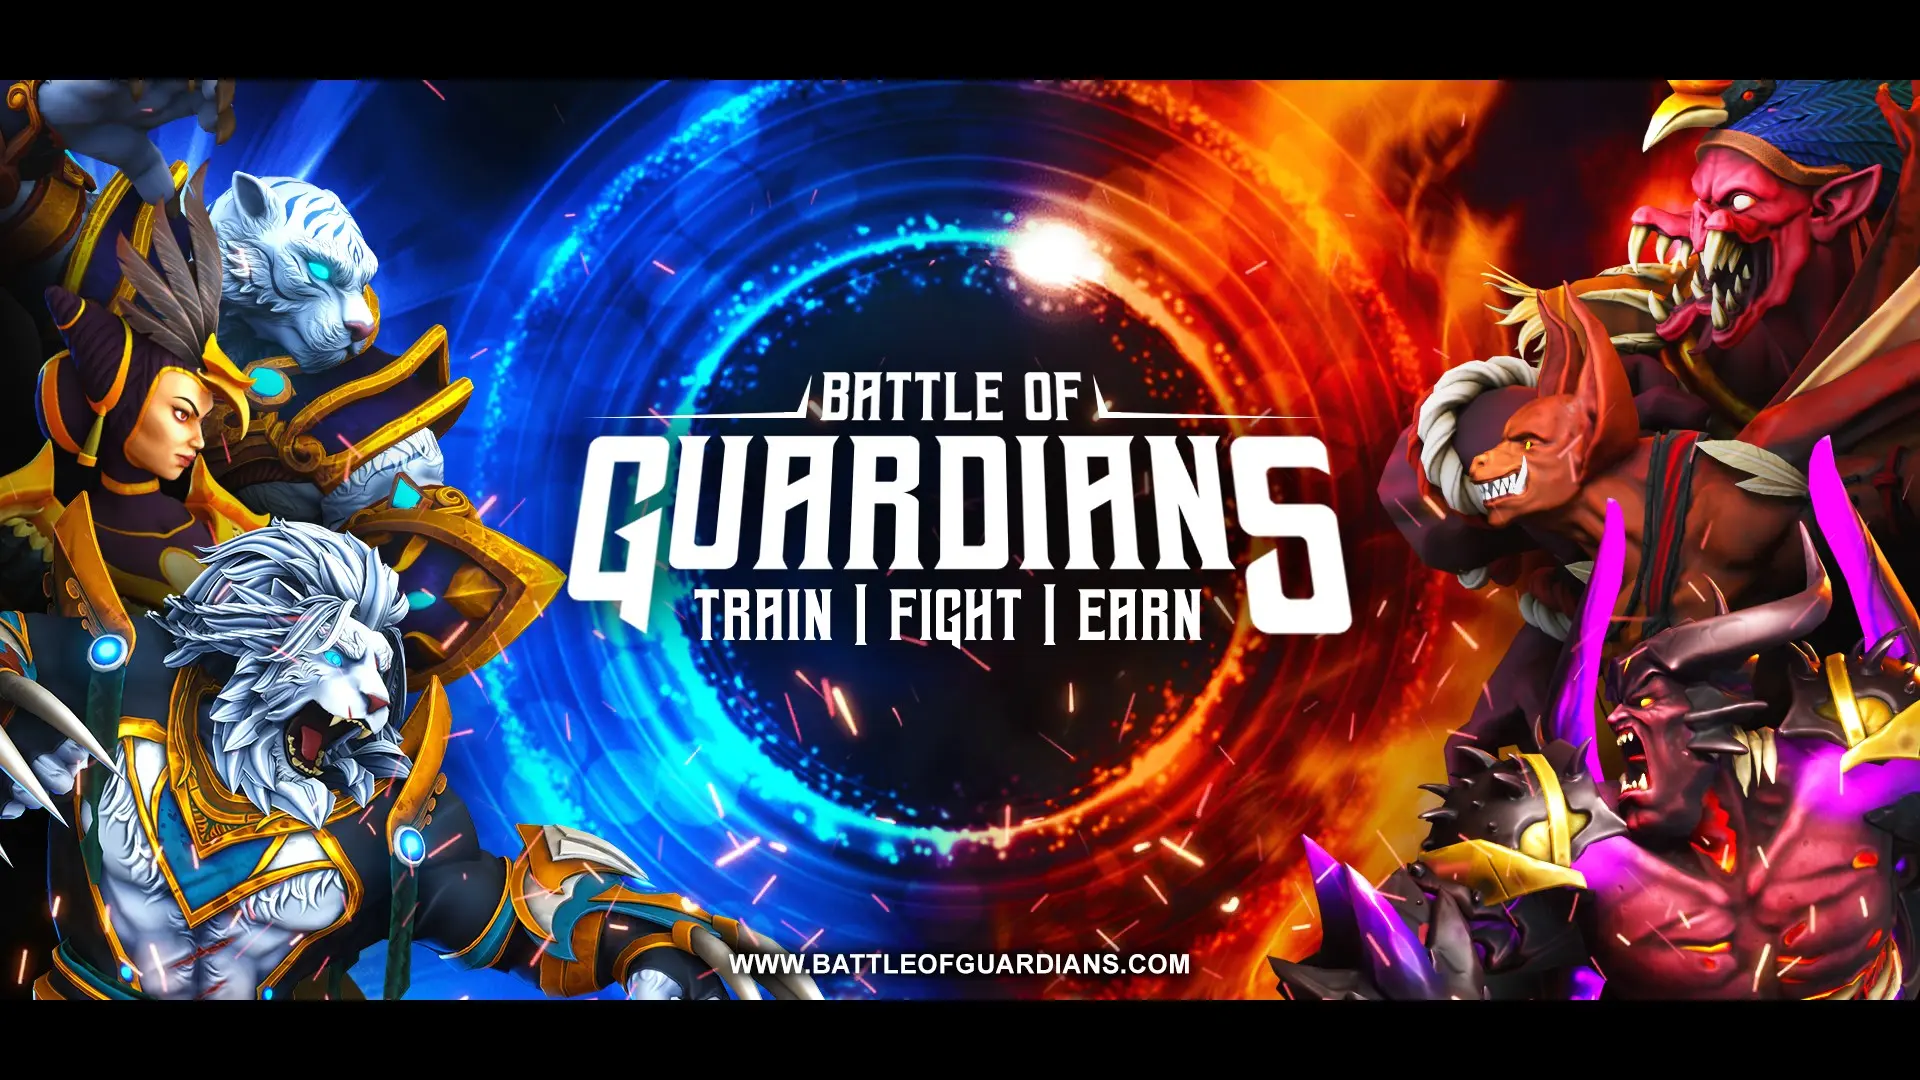 “Battle of Guardians”: A PvP Fighting Blockchain NFT Game that Will Break the Fighting Game Genre